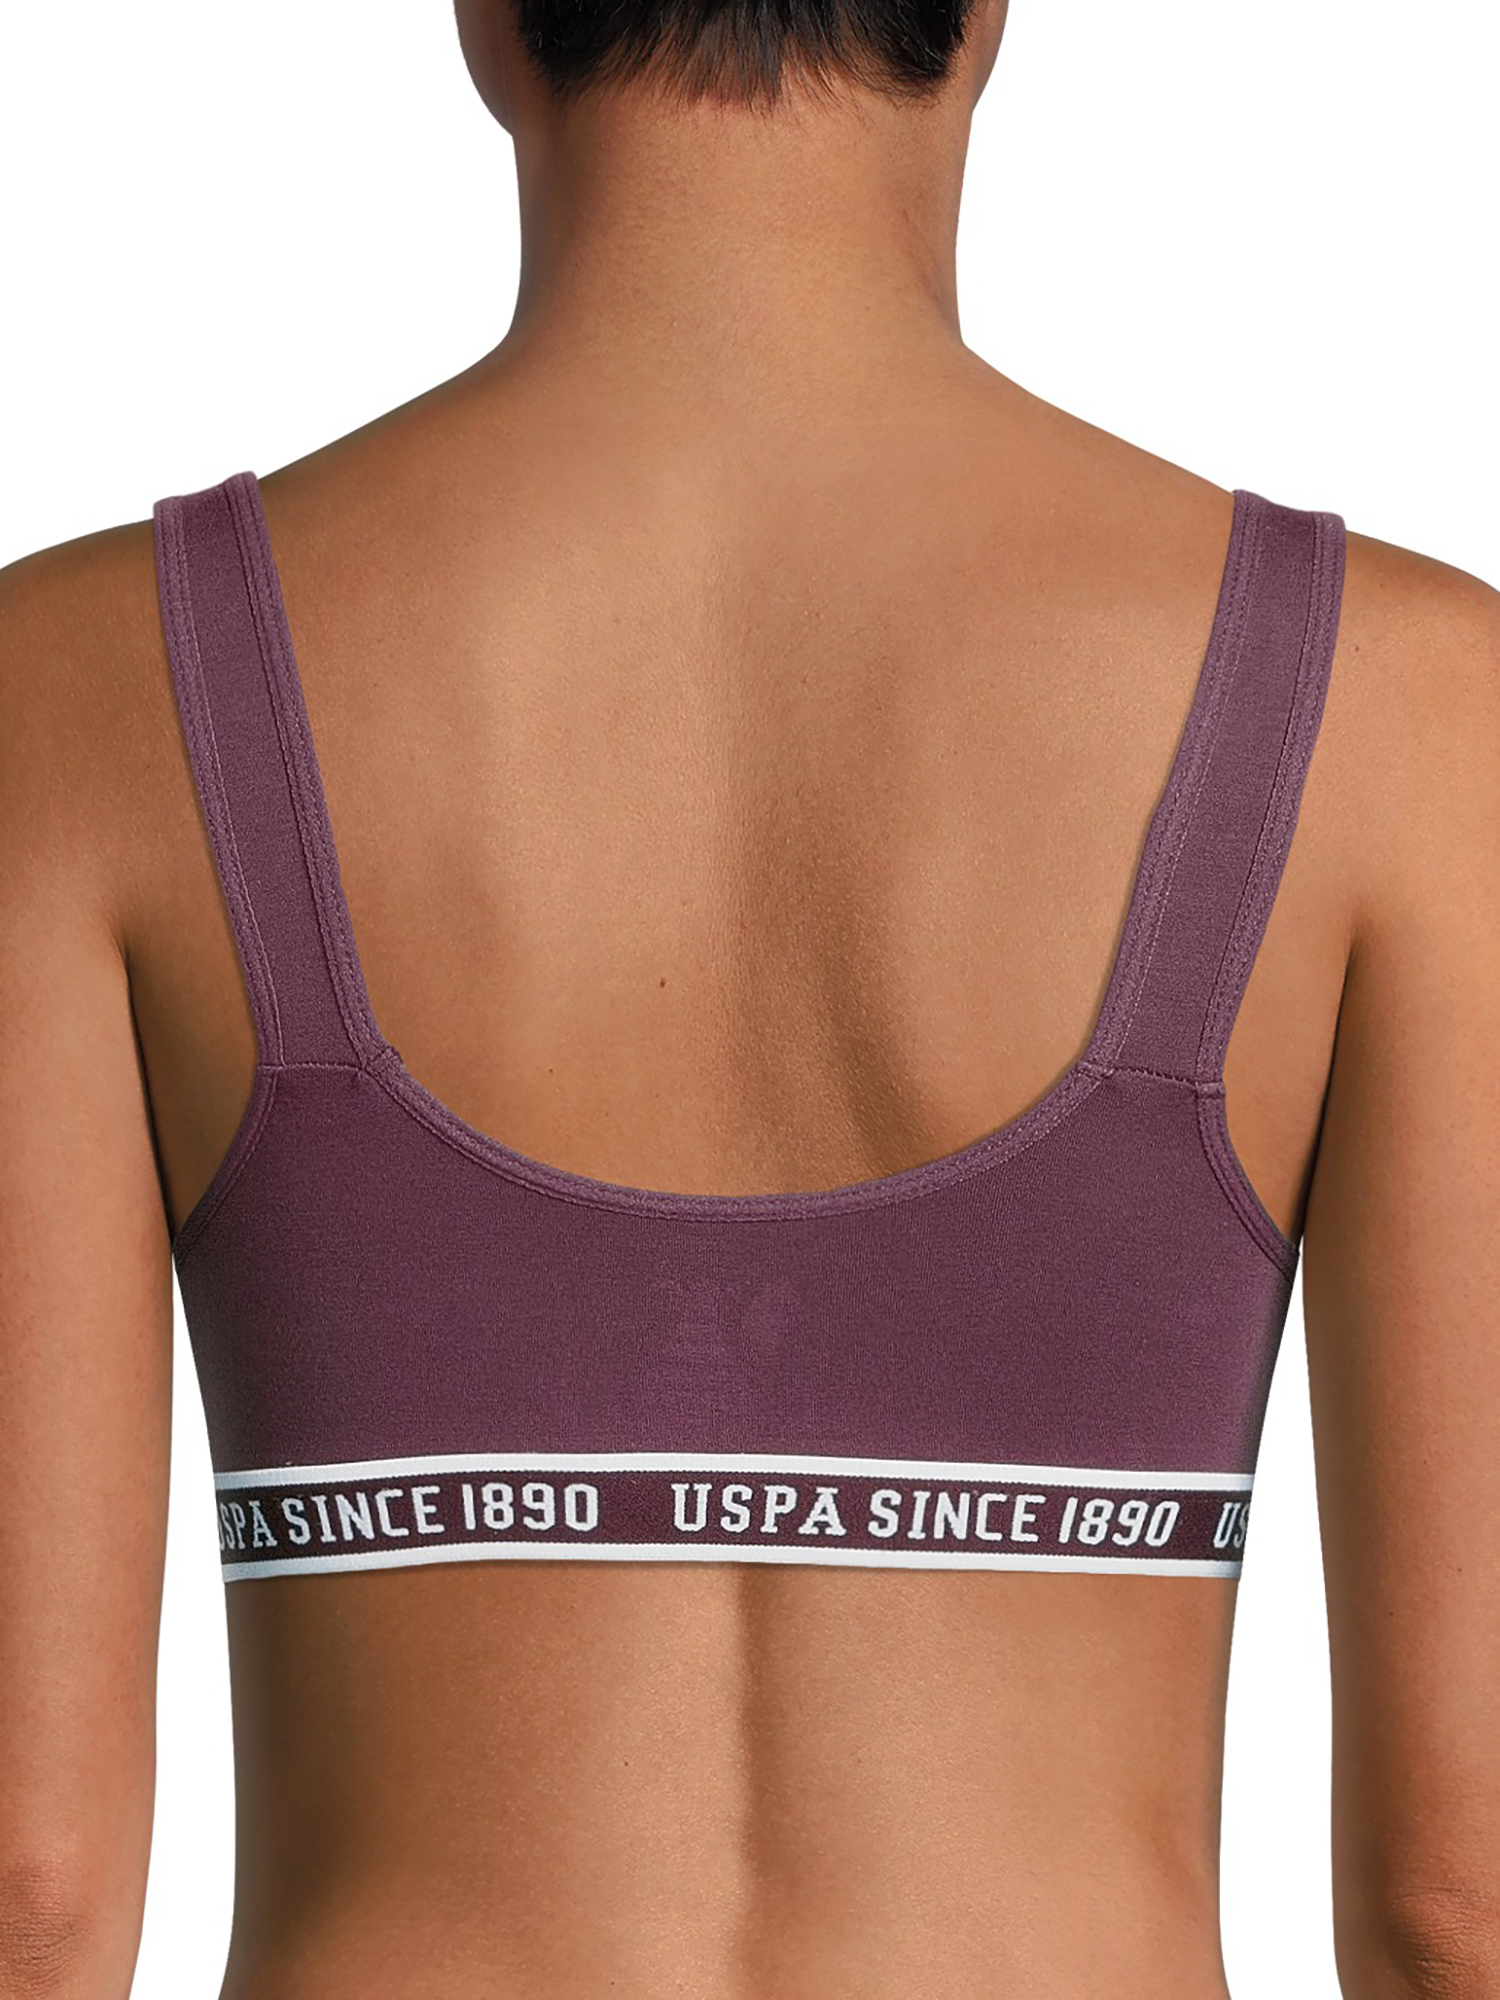 U.S. Polo Assn. Women's Tag-Free Sports Bra Set, 3-Pack - image 4 of 4